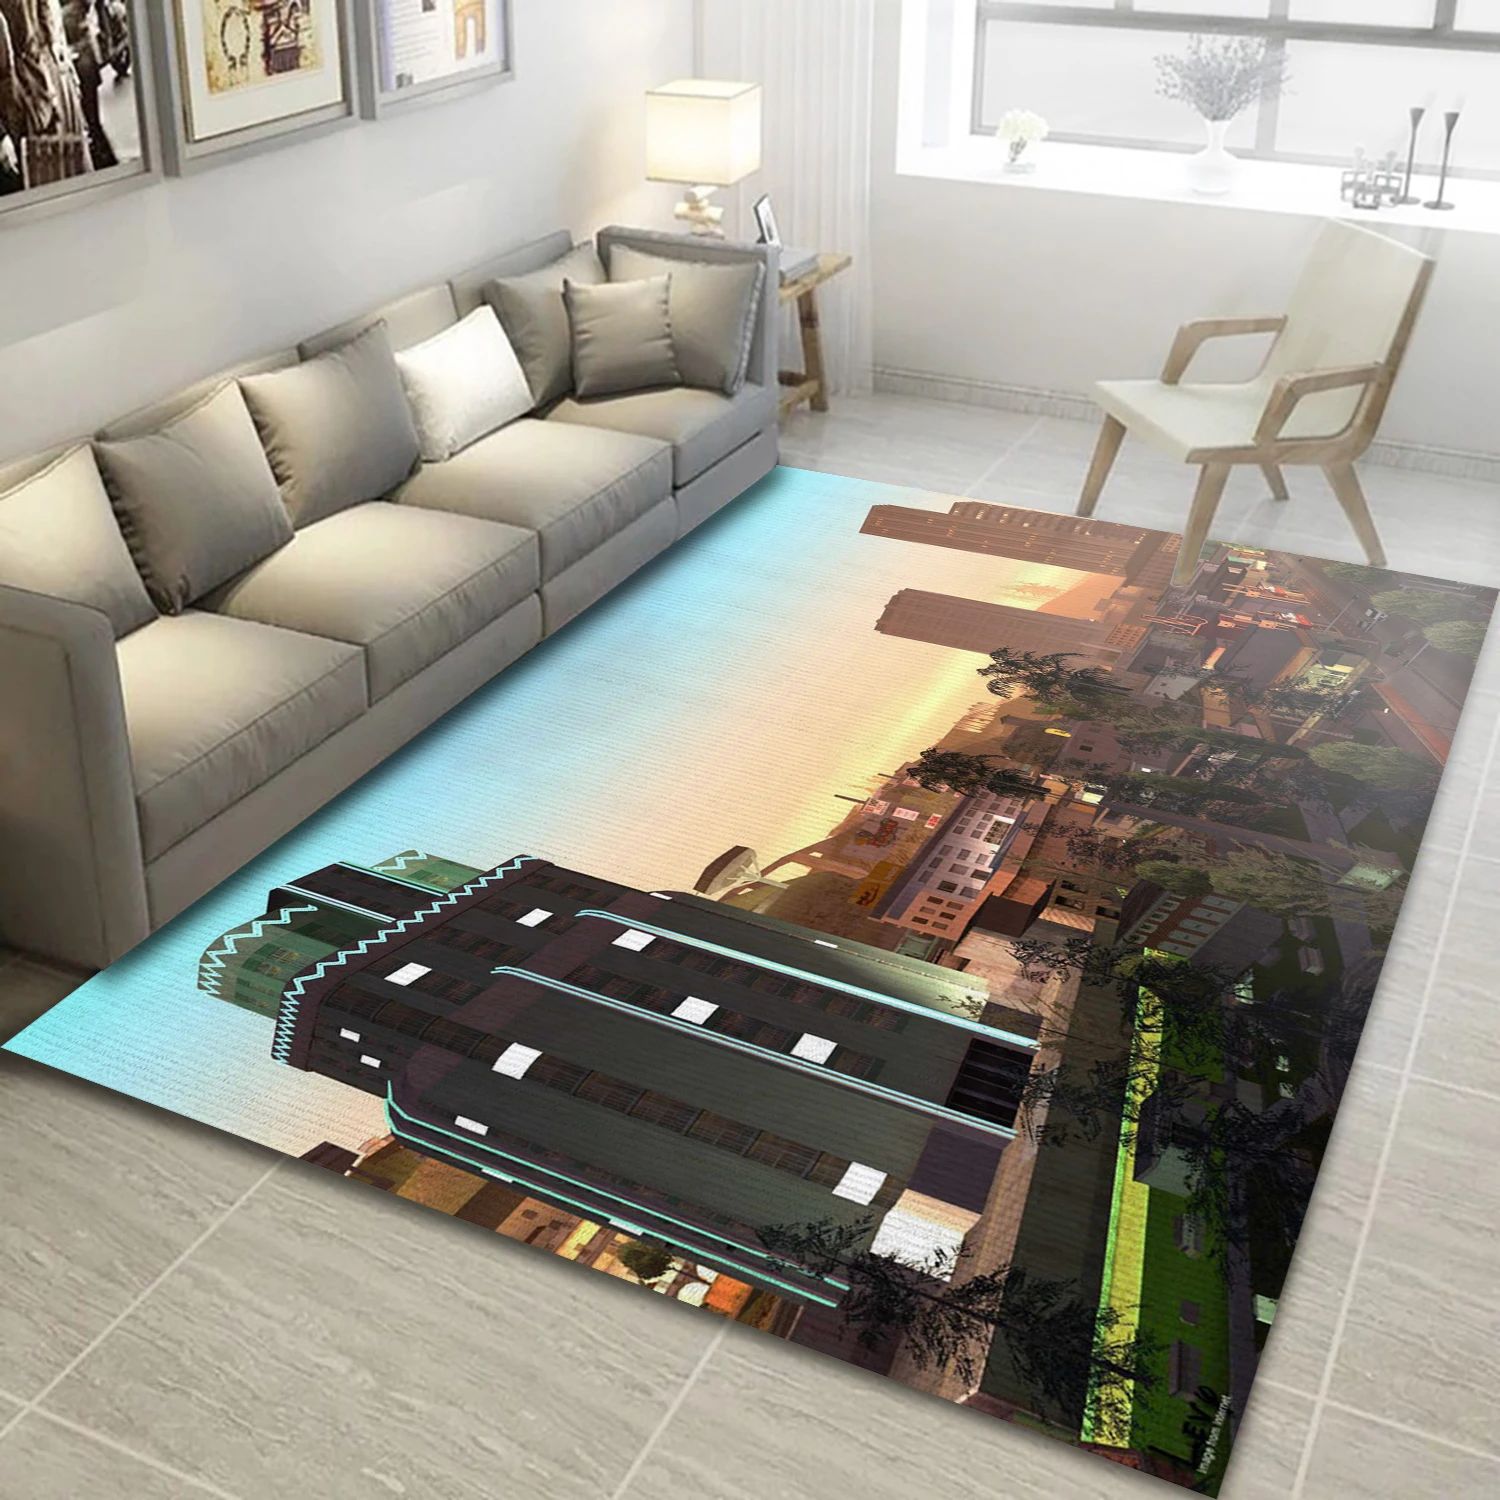 Grand Theft Auto San Andreas Video Game Area Rug For Christmas, Living Room Rug - Family Gift US Decor - Indoor Outdoor Rugs